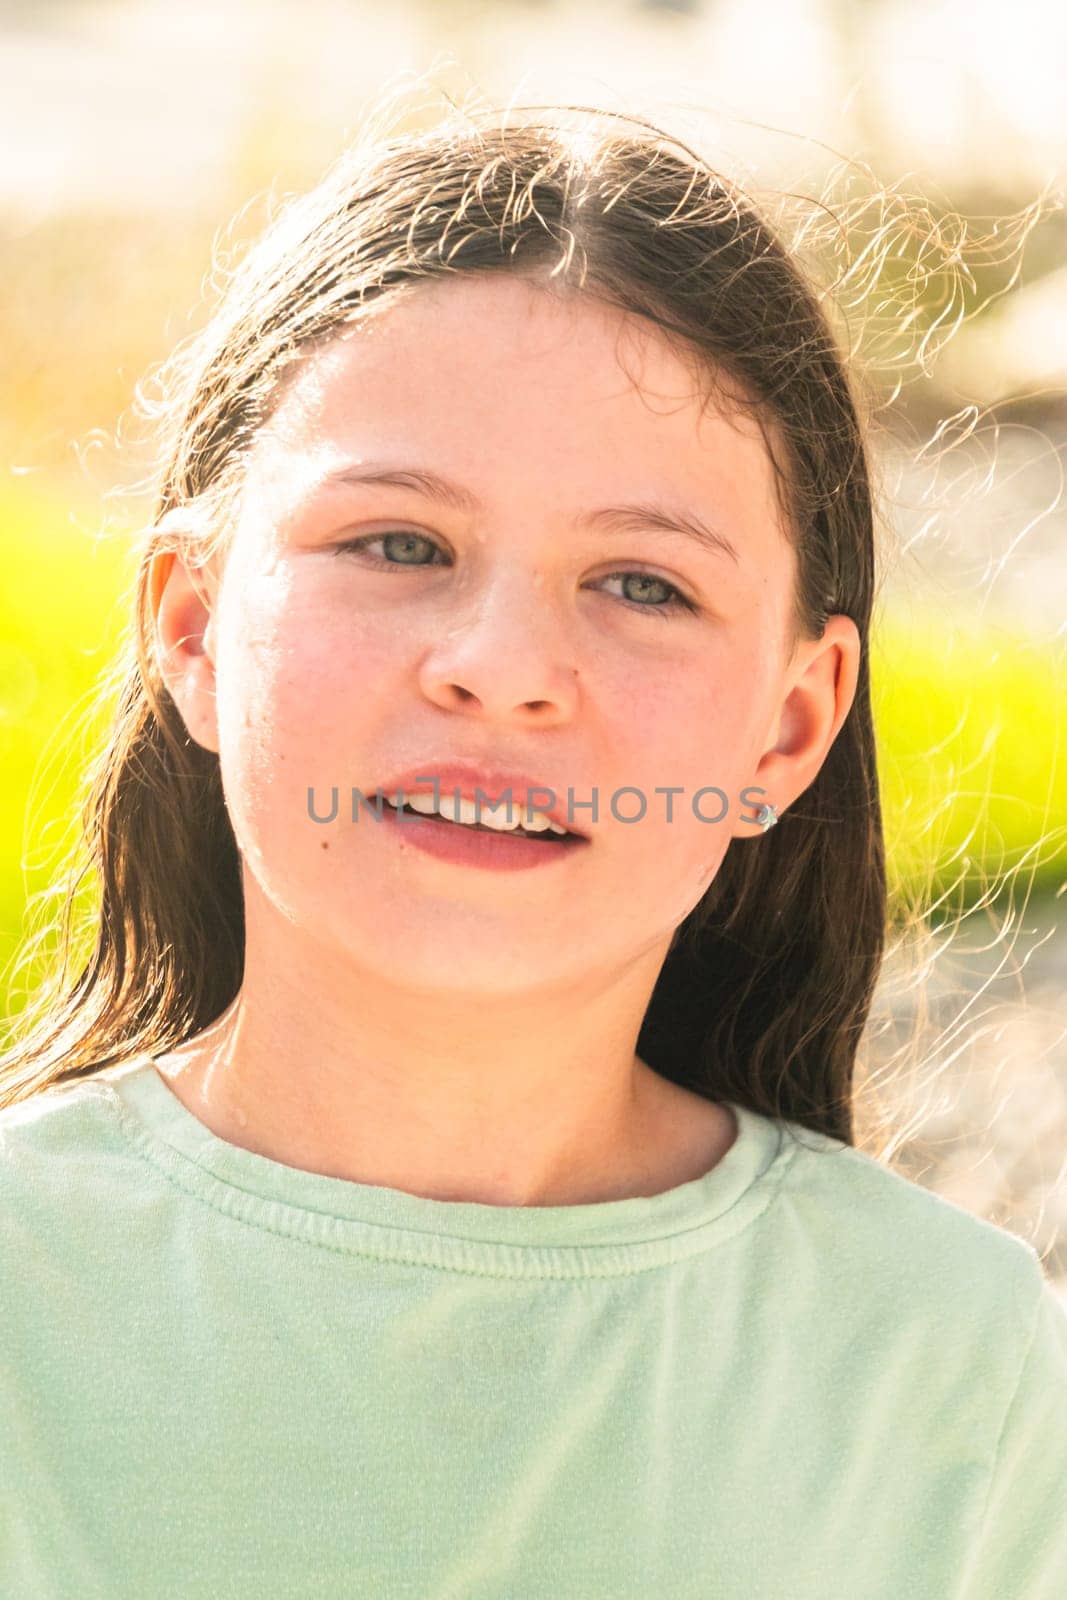 A joyful young girl gleefully gets soaked in refreshing water mist during a hot summer day.